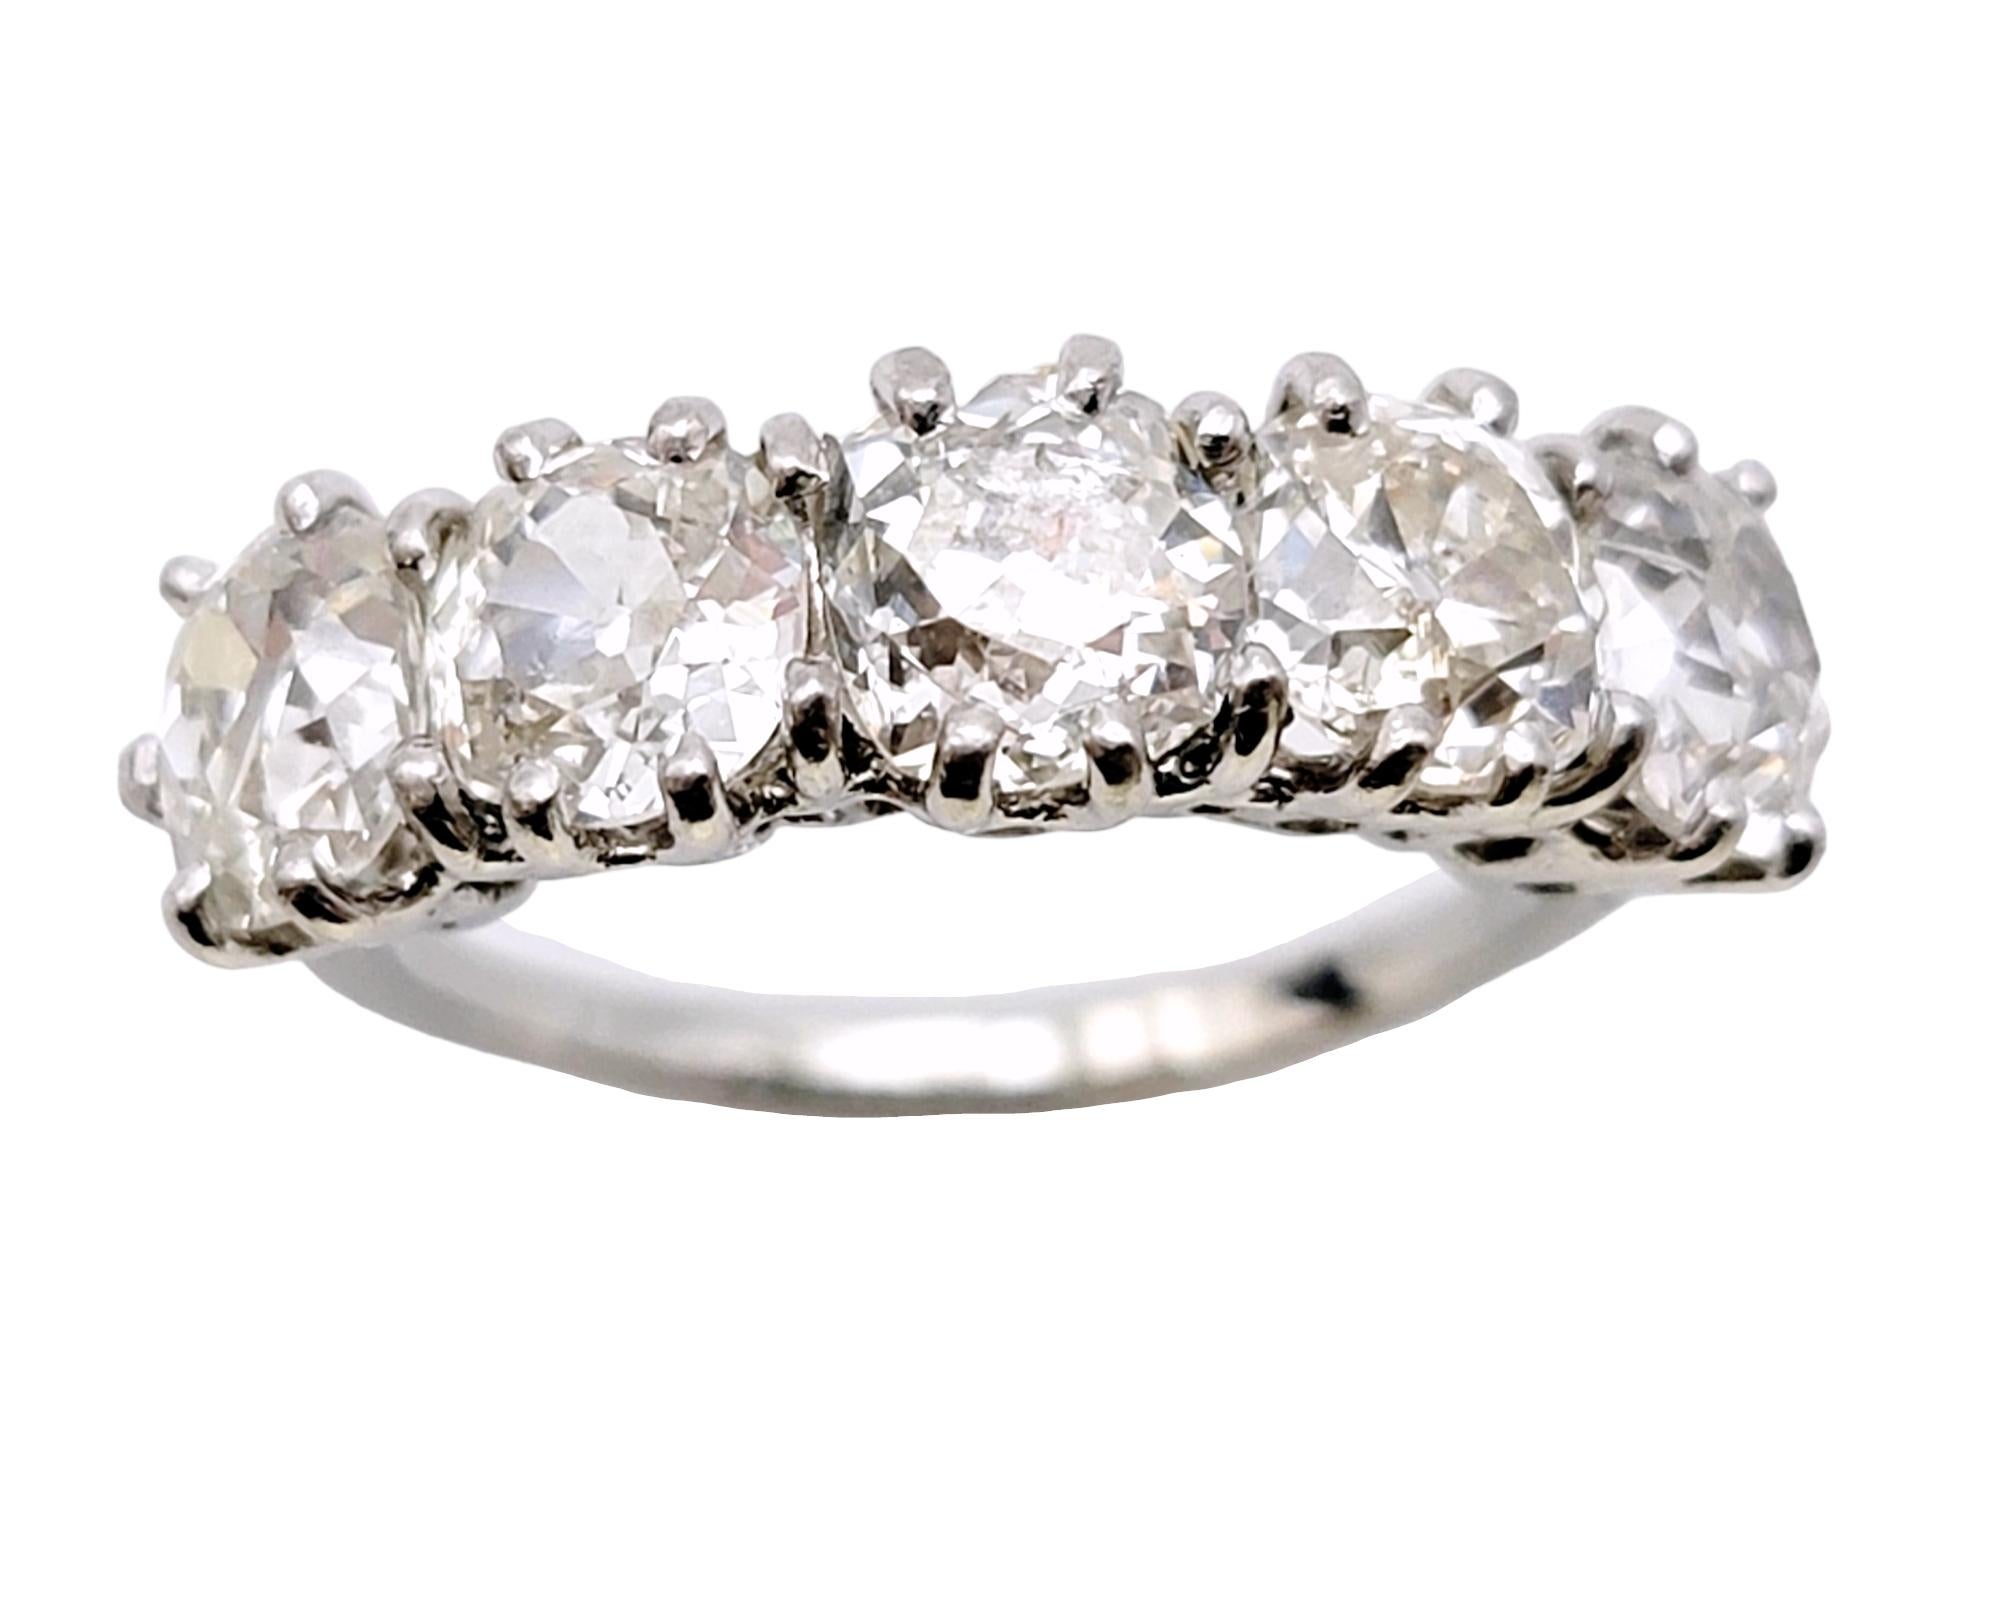 Ring size: 7

This stunningly sparkly vintage 5 stone semi-eternity band ring absolutely radiates on the finger. The glamourous Old World design paired with the sizable natural diamonds, makes this piece a true treasure. 
 
This classic beauty